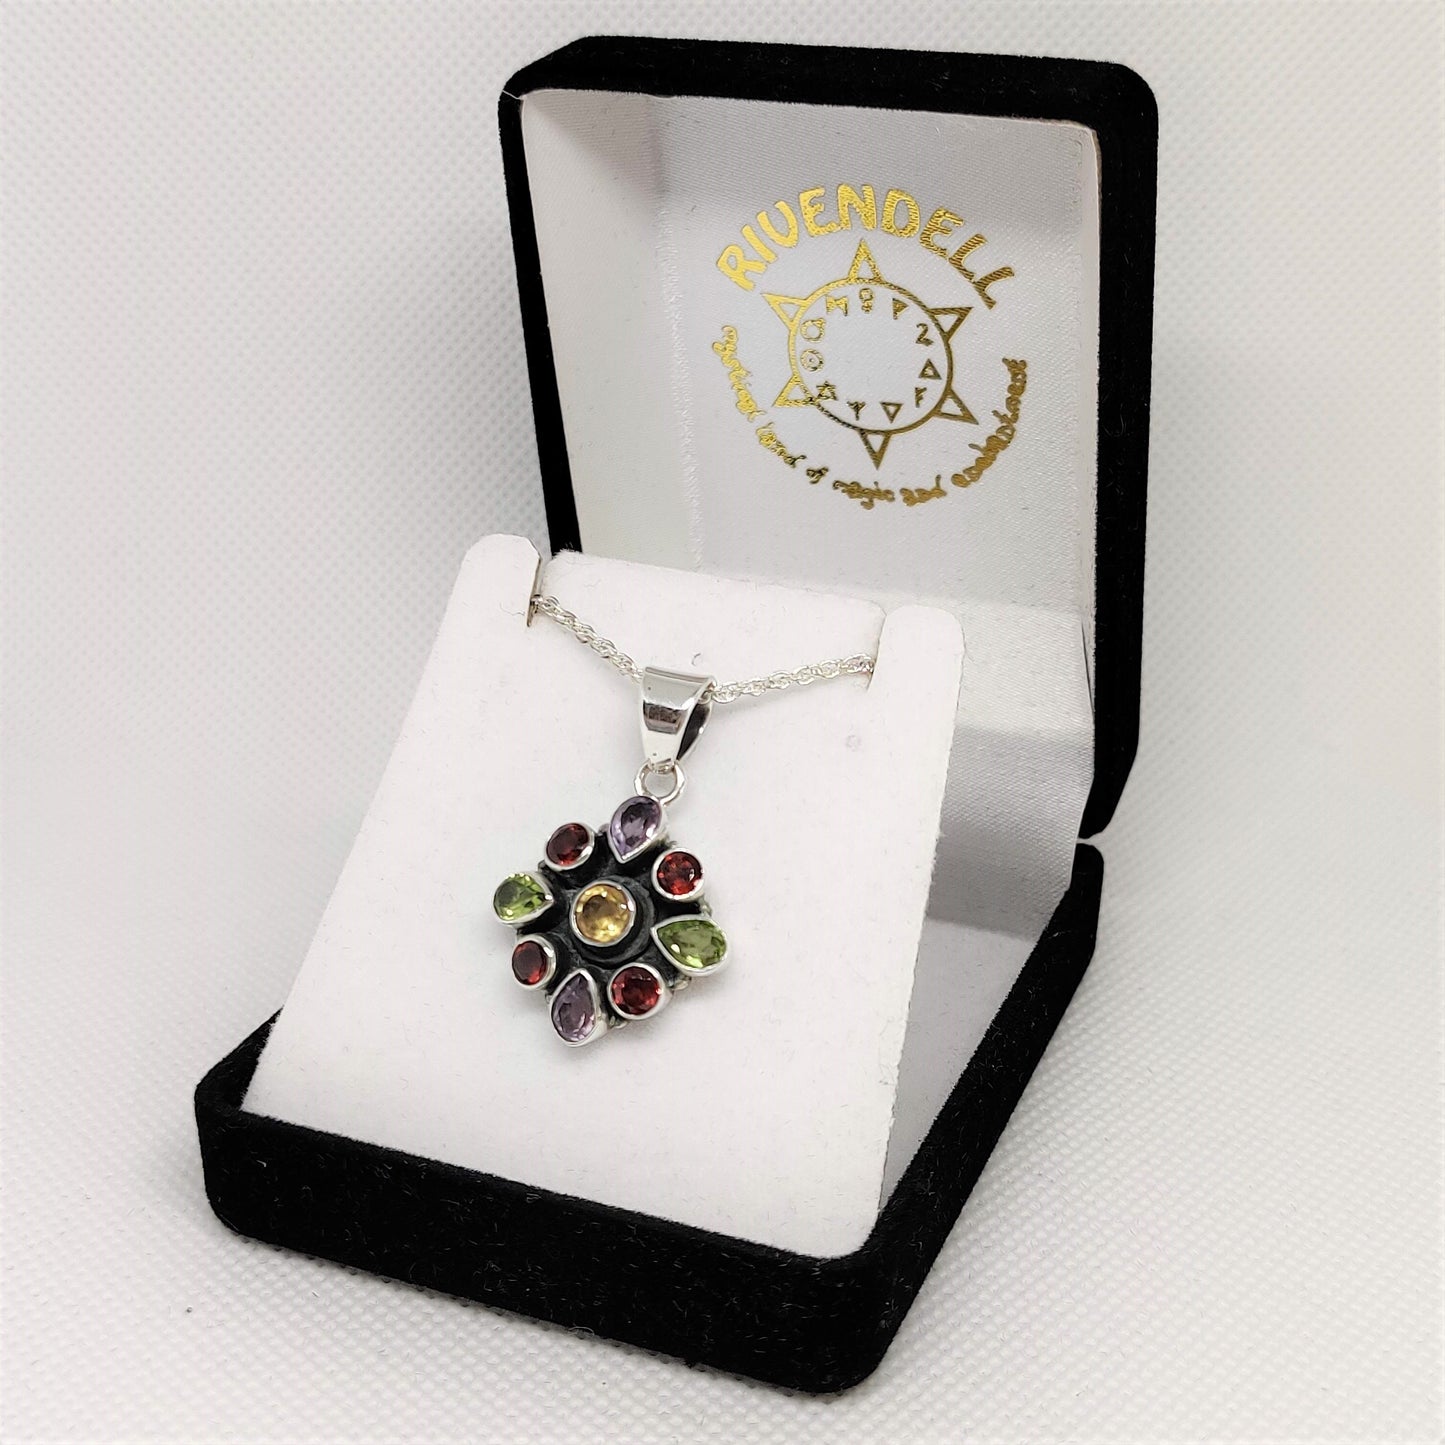 Peridot, Amethyst, Ruby and Citrine Flower 925 Sterling Silver Pendant - Rivendell Shop